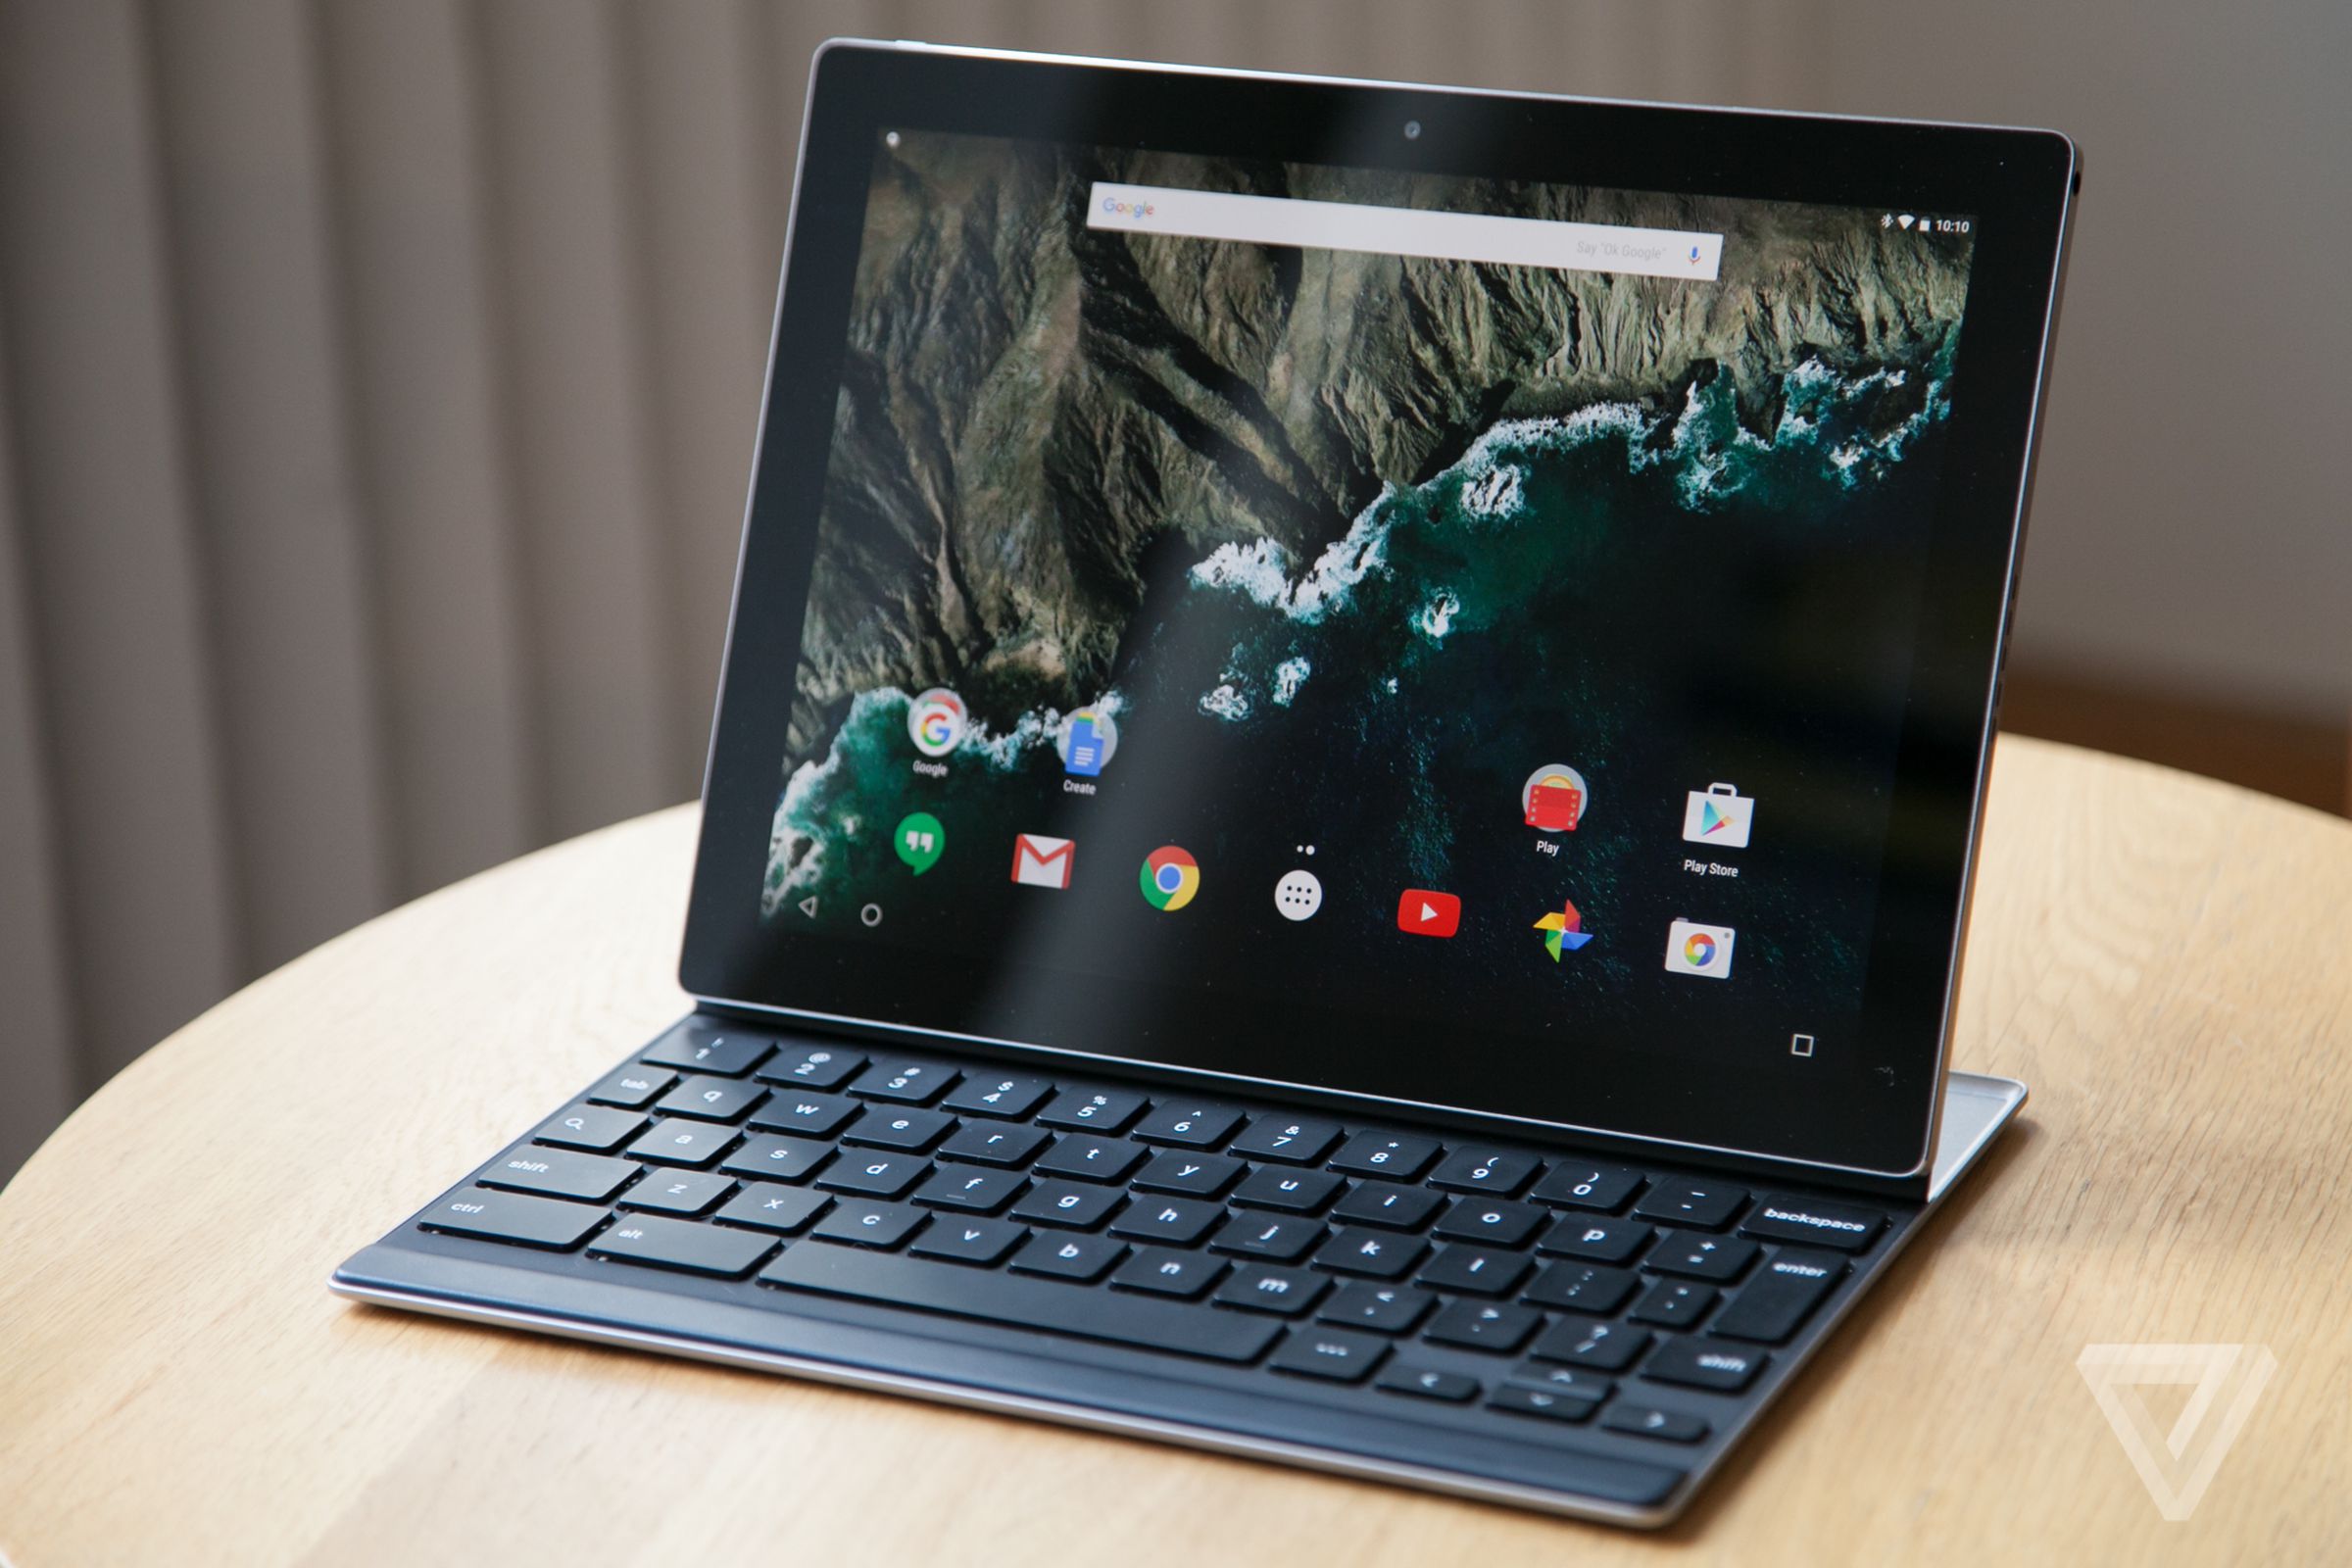 The 2015 Pixel C, powered by Android